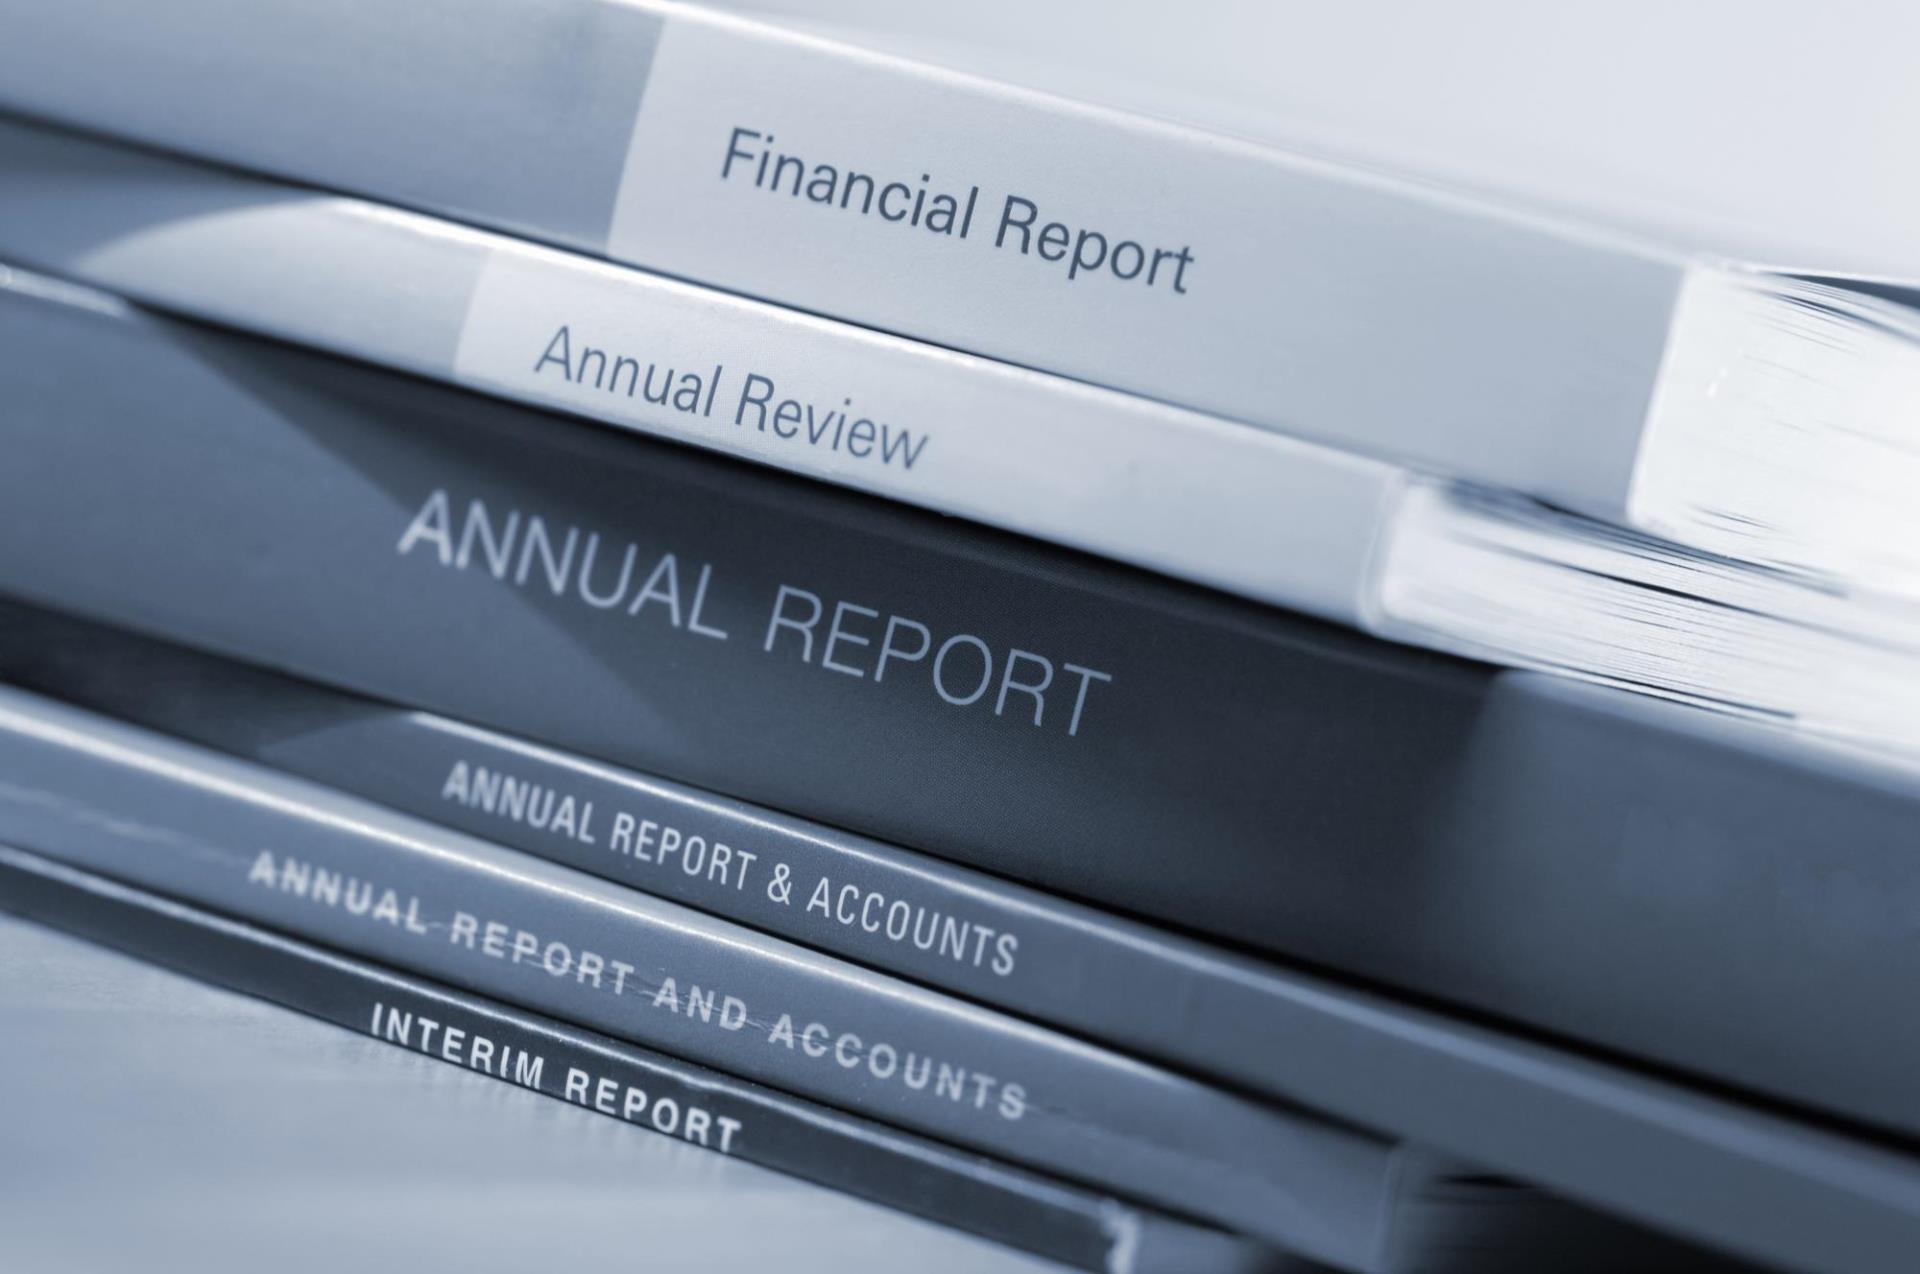 Summary of Housing Related Activities - Widget Image - Financial Report, Annual Review, Annual Report, Annual Report and Accounts, Interim Report 